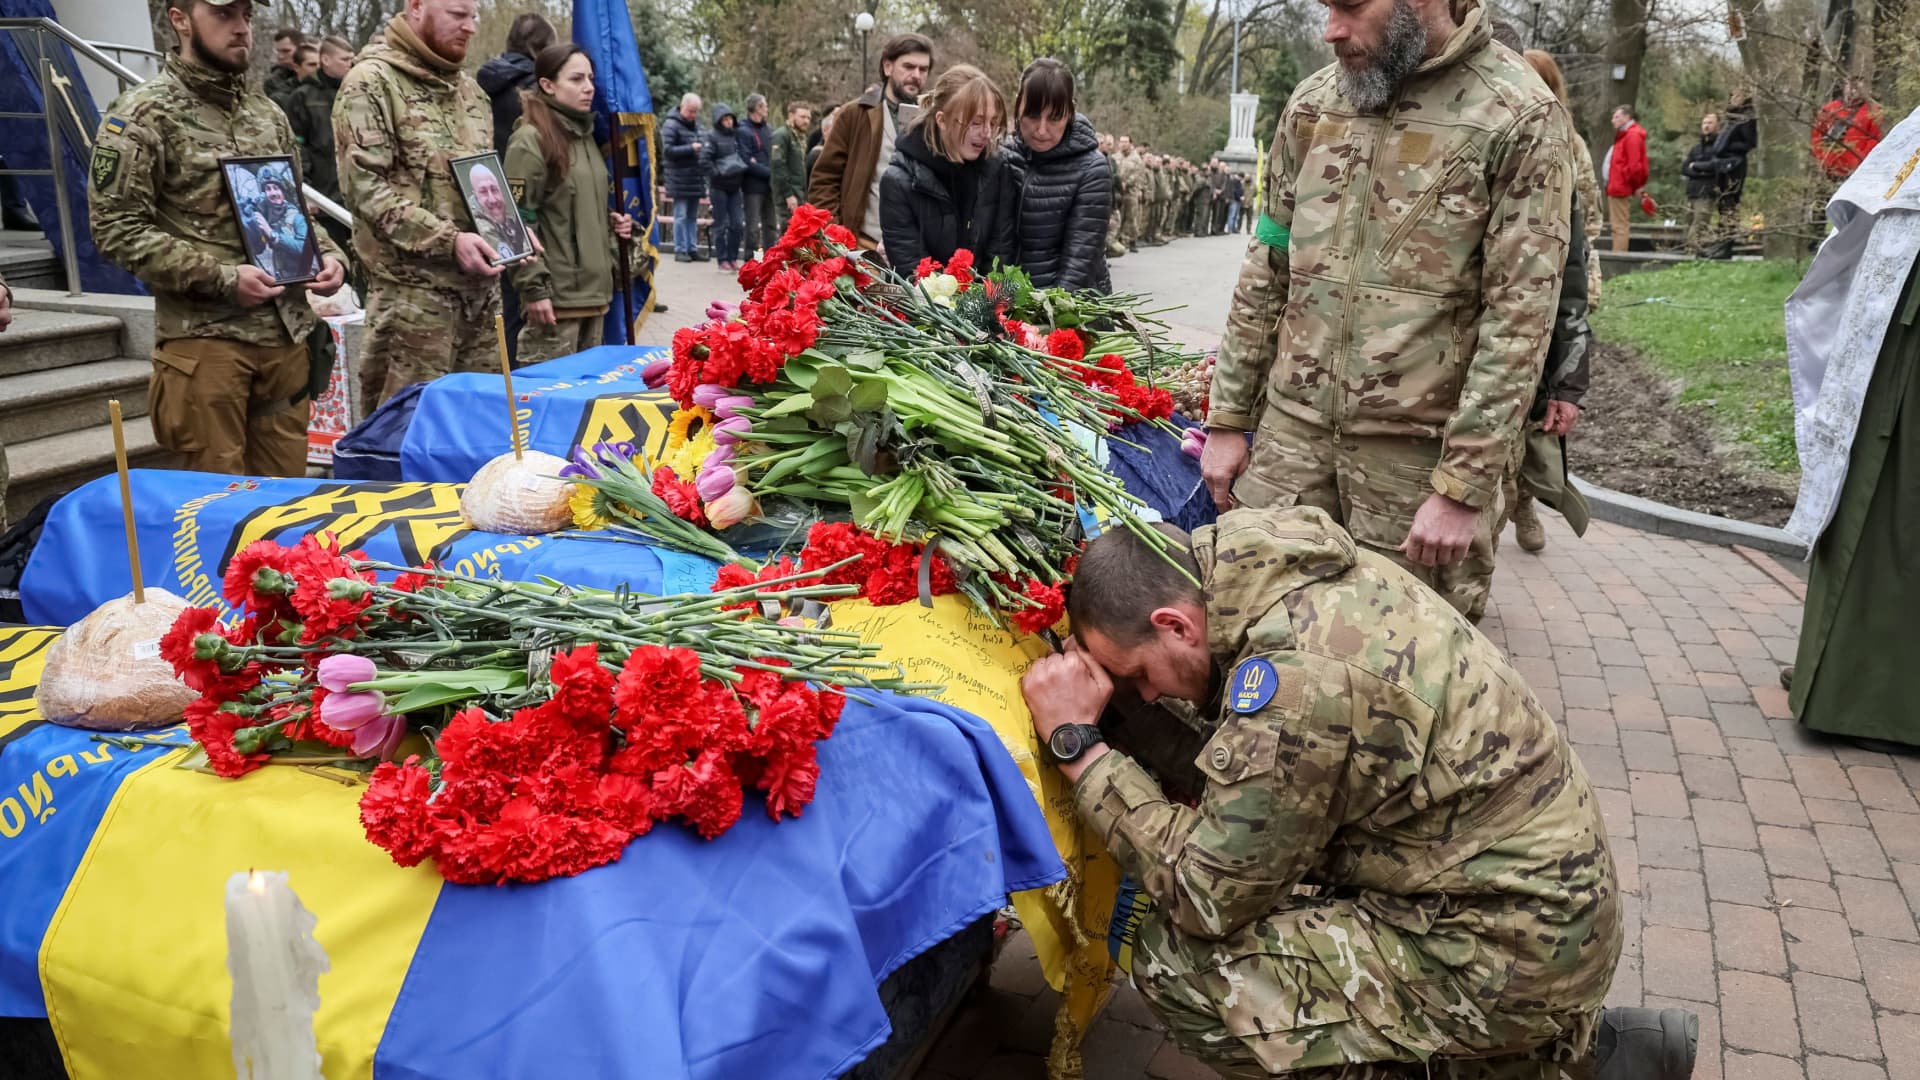 Servicemen of the Ukrainian National Guard attend the funeral of four of their fellow servicemen, who were killed during Russia's invasion of Ukraine, in Kyiv, Ukraine, April 20, 2022.